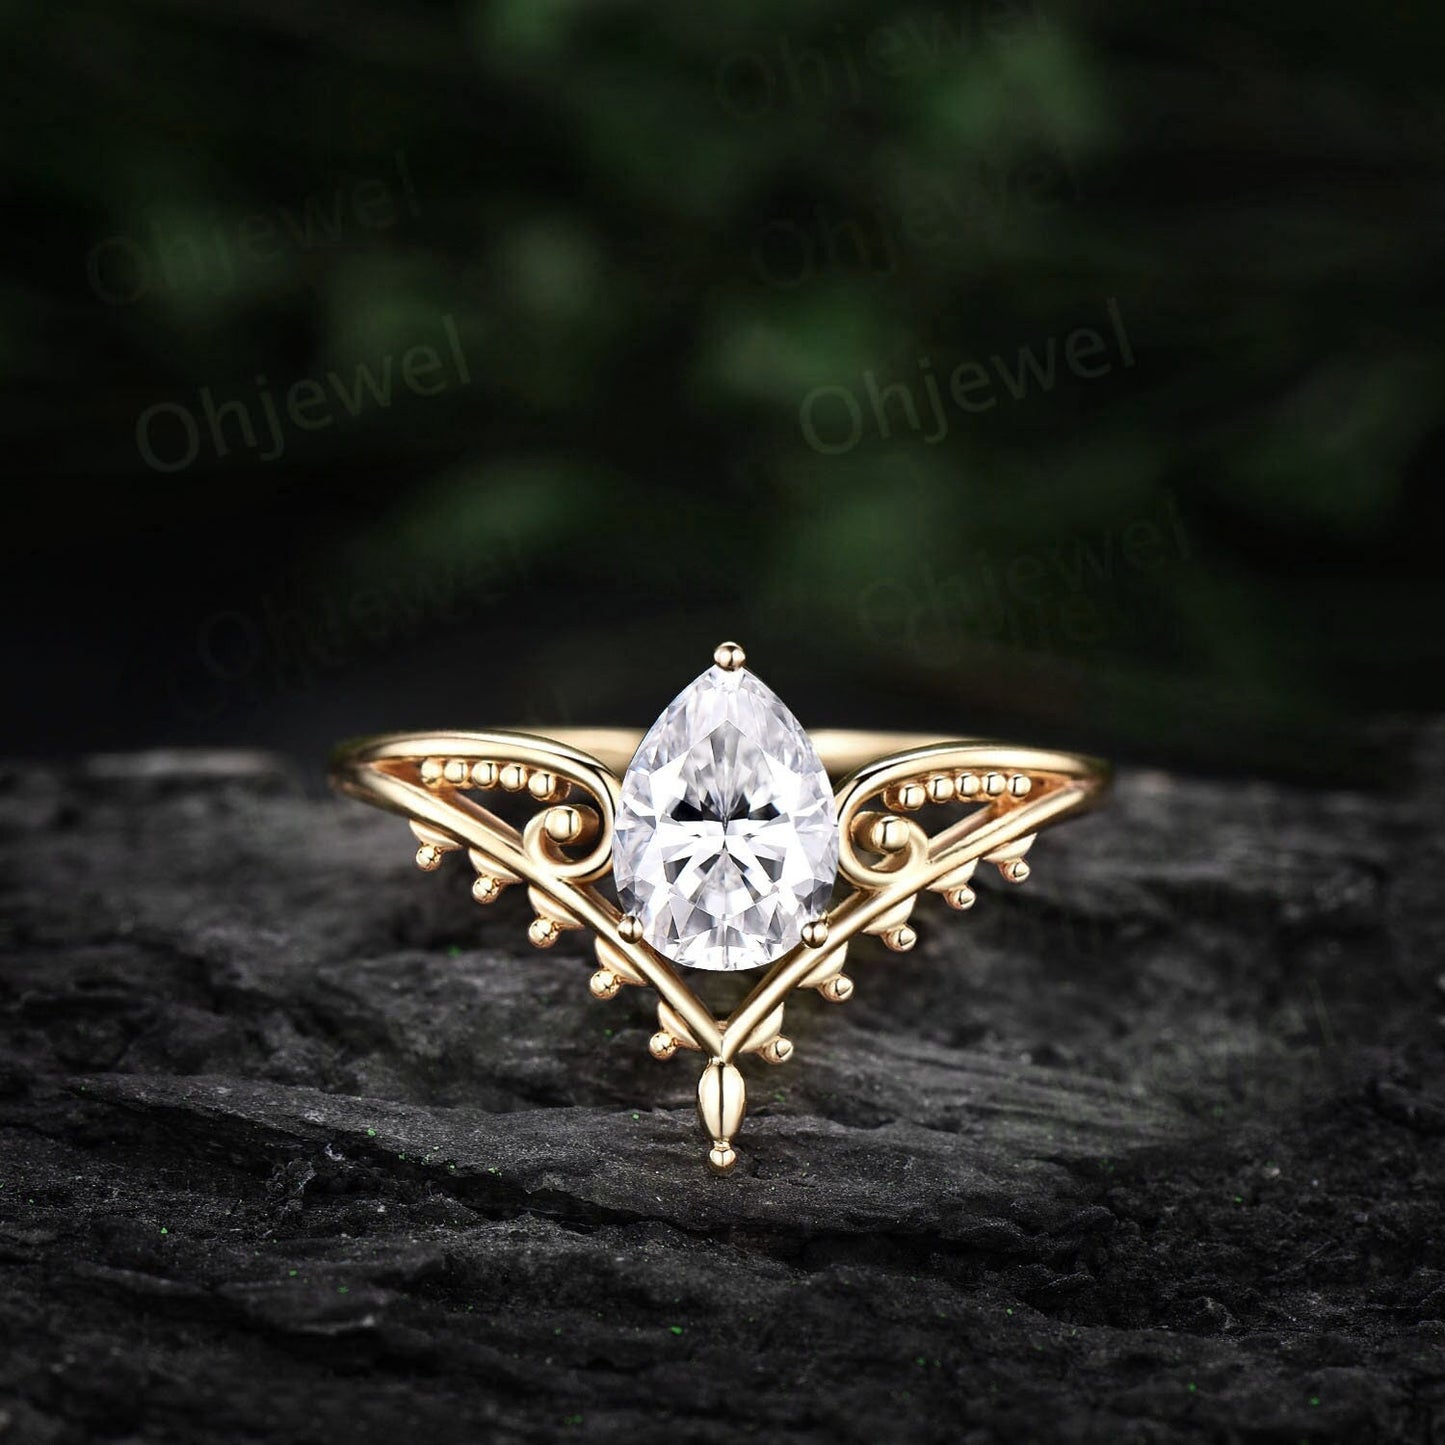 Vintage style pear shaped moissanite engagement ring 14k yellow gold unique split shank Solitaire engagement ring wedding ring for women